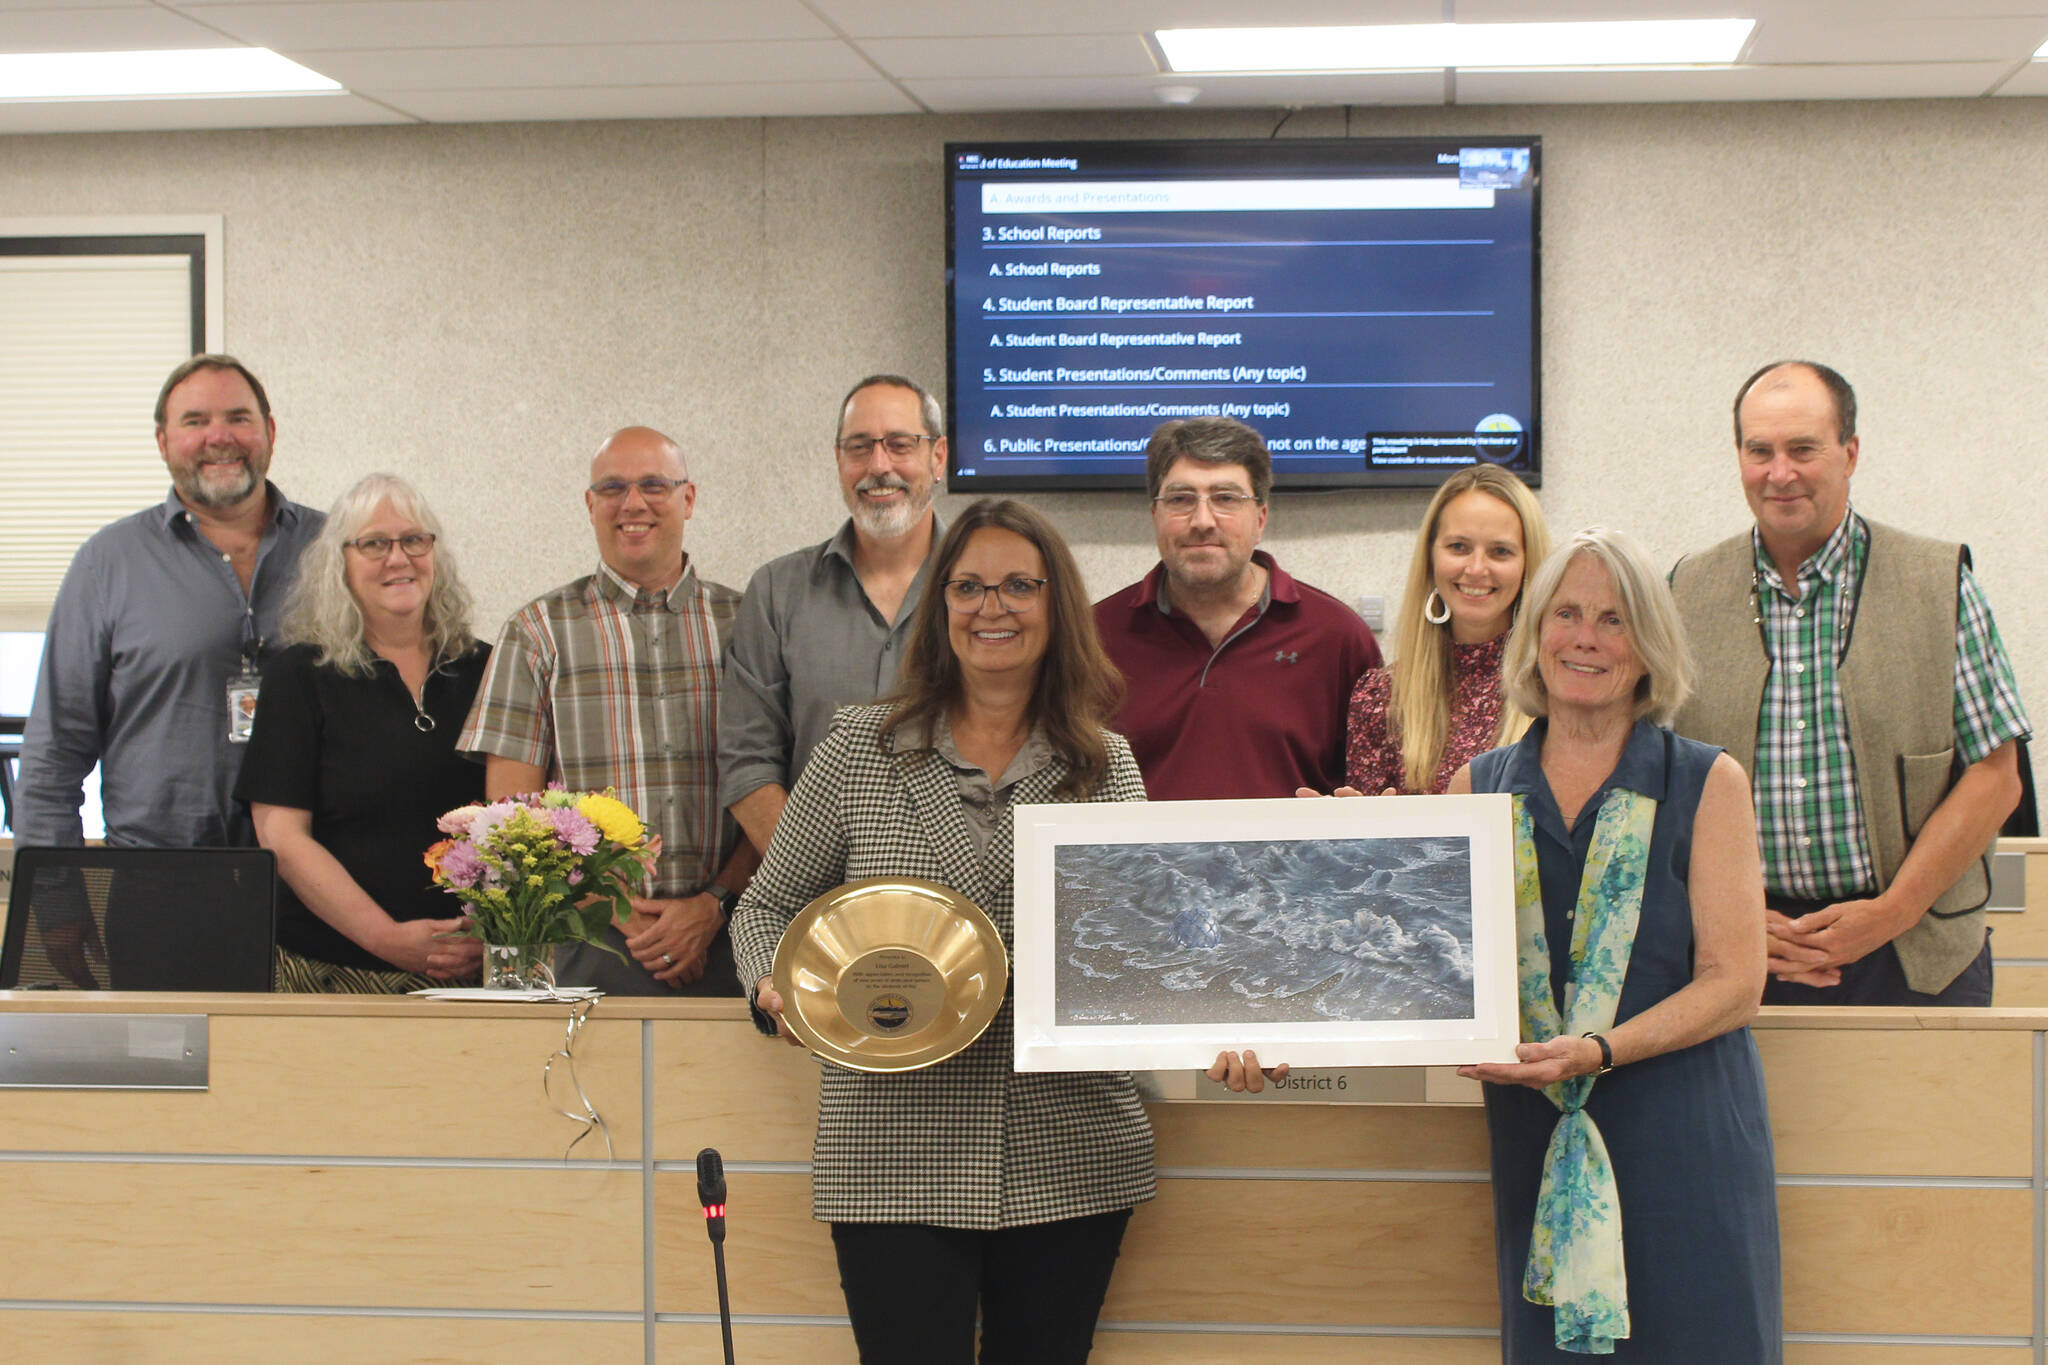 Lisa Gabriel, front left, is honored for her 28 years of service to the Kenai Peninsula Borough School District during a Board of Education meeting on Monday, July 11, 2022, in Soldotna, Alaska. (Ashlyn O’Hara/Peninsula Clarion)